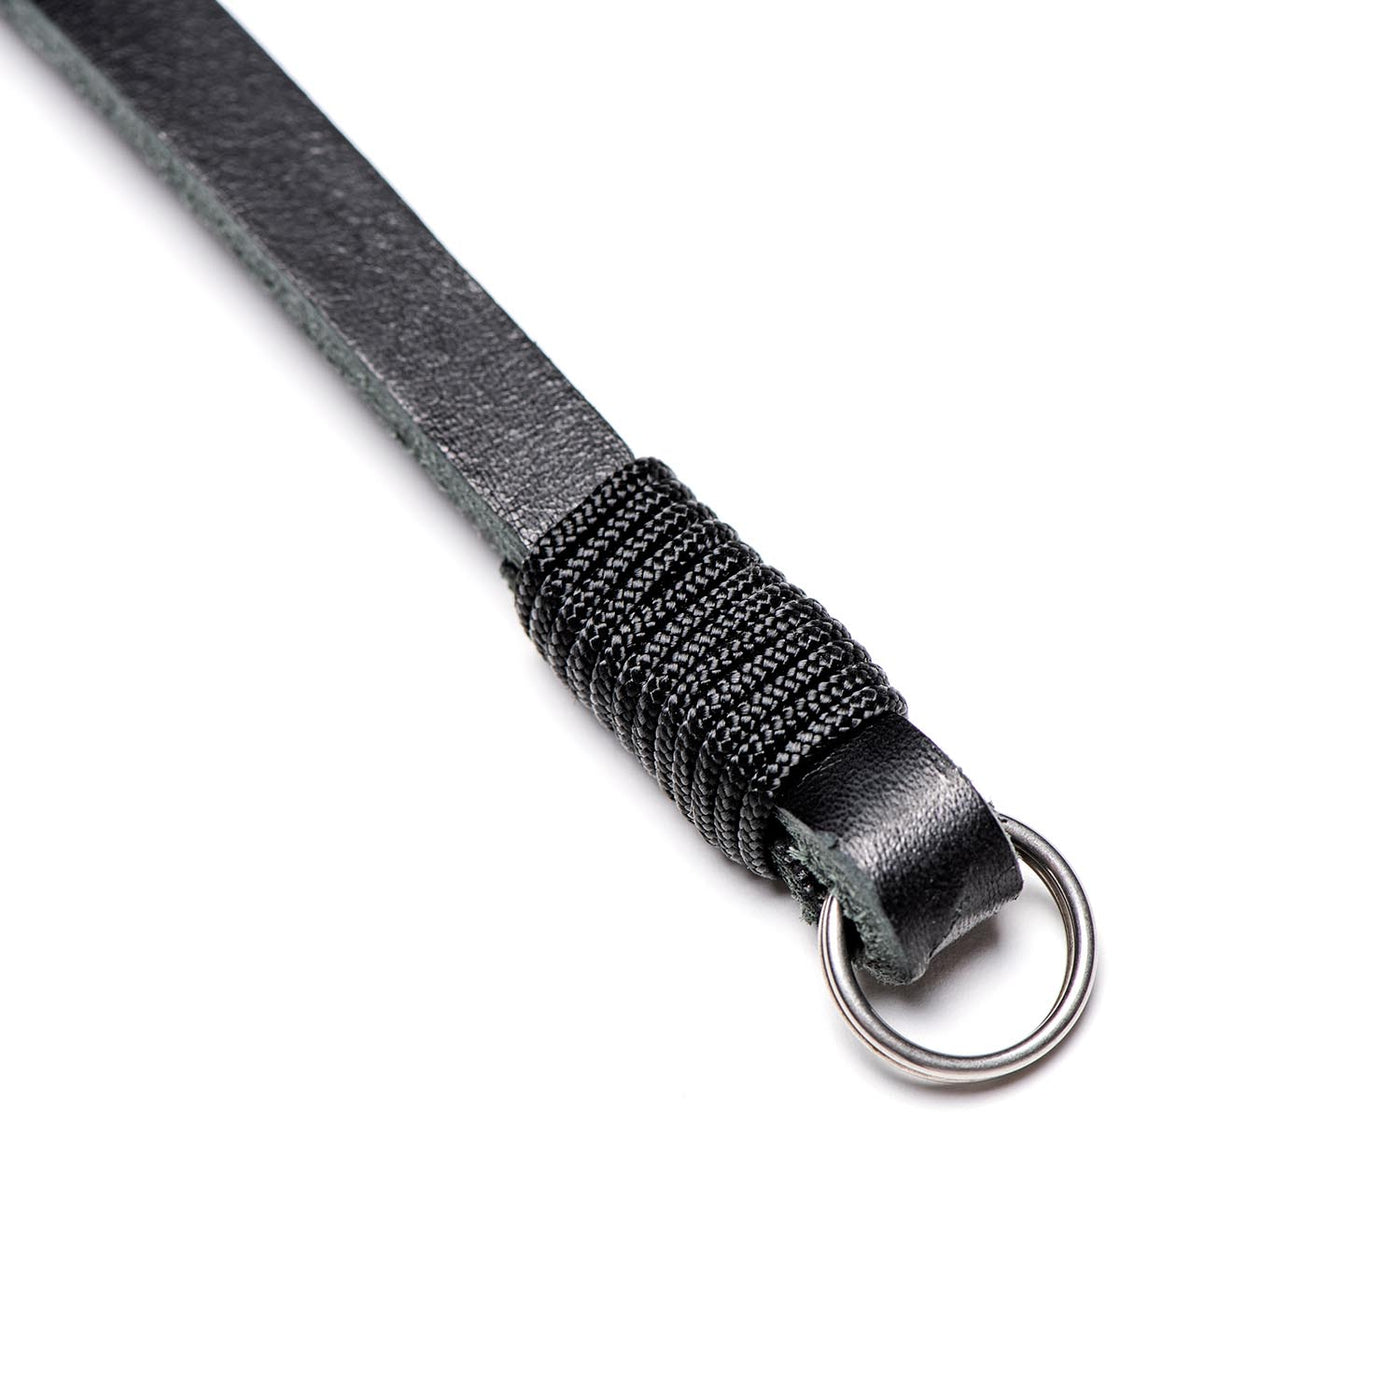 Leather end of Leica Paracord Strap 